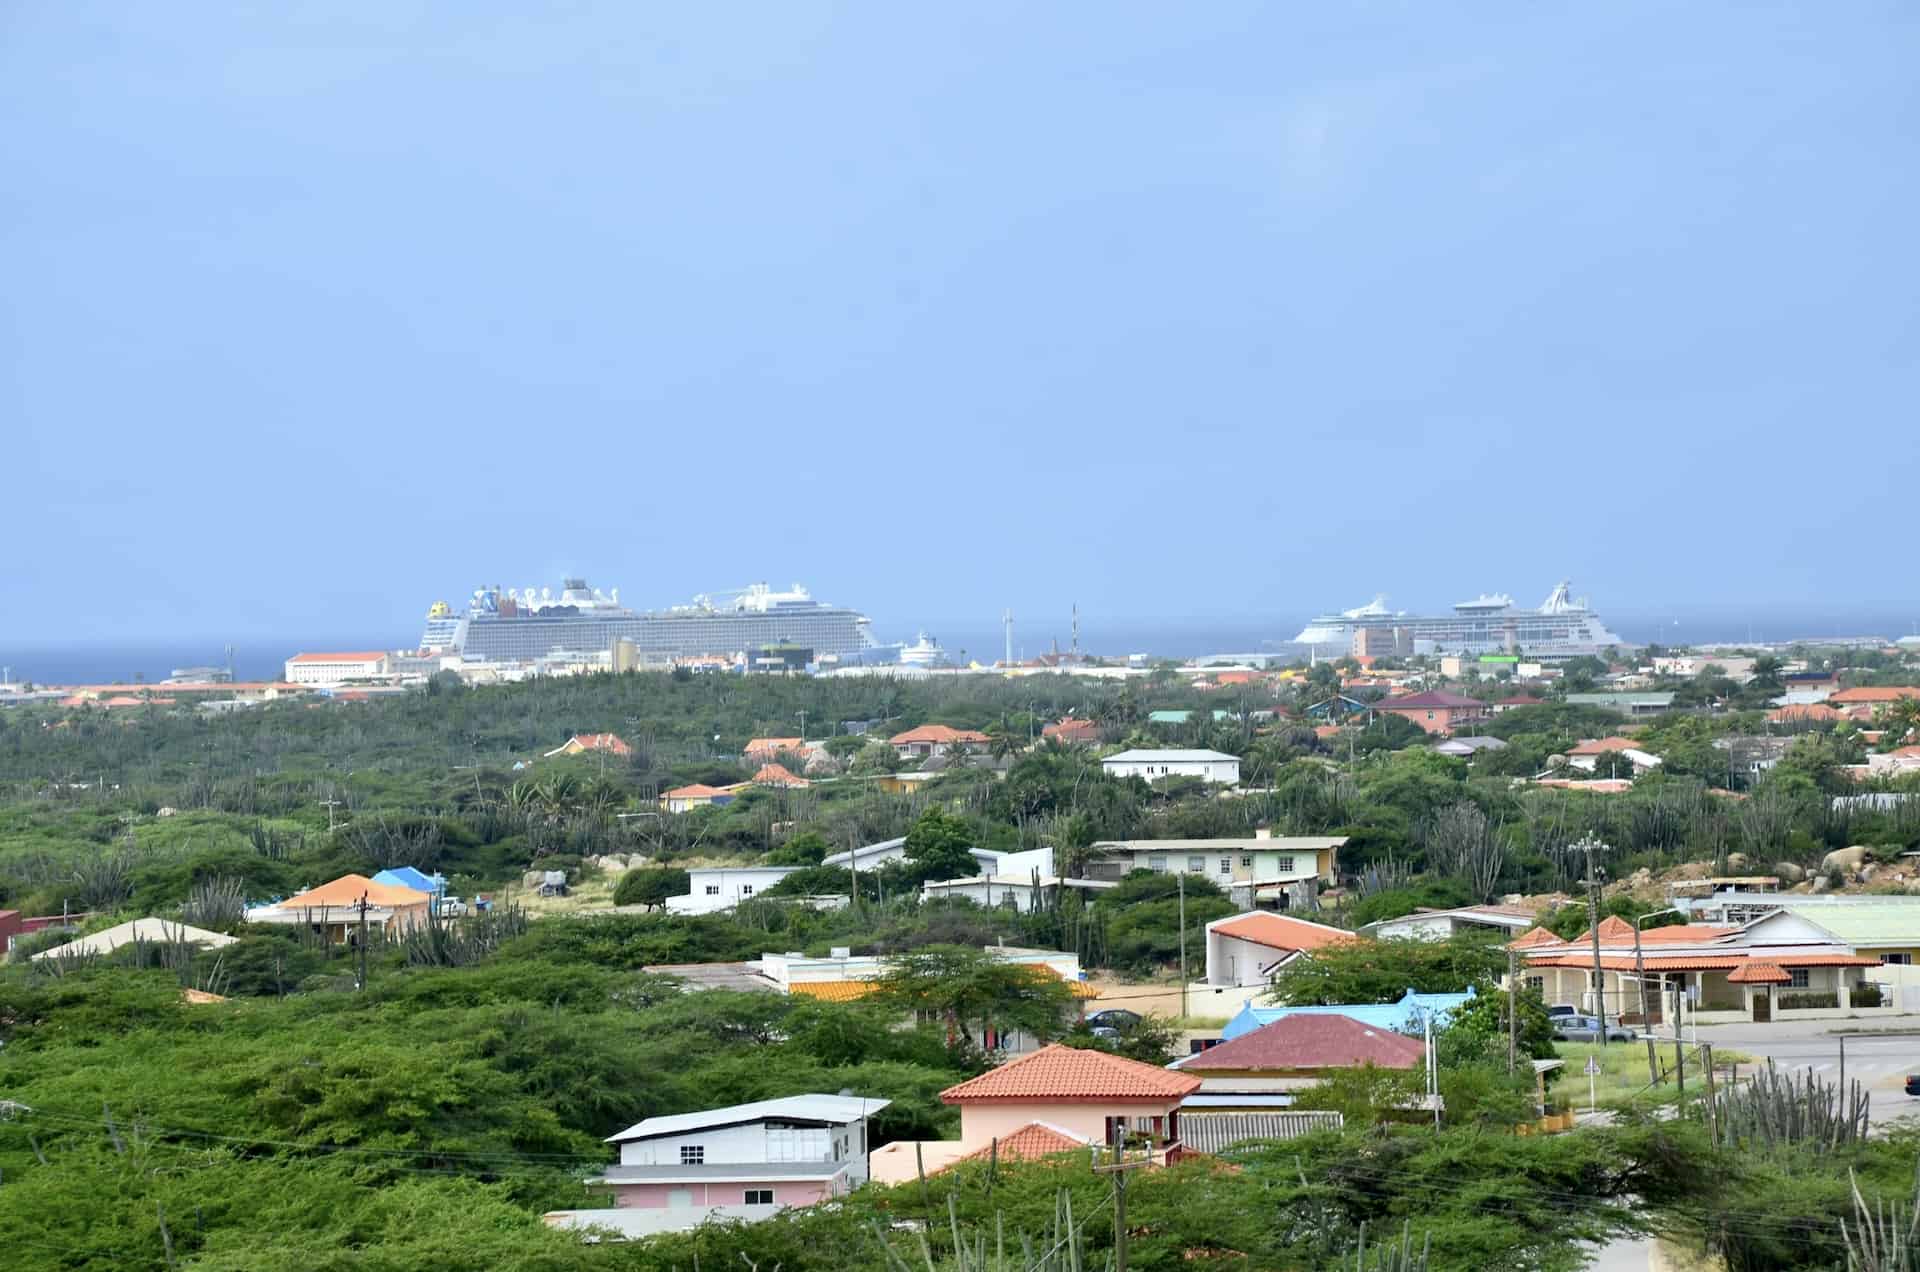 Cruise ships in Oranjestad from the top of the largest rock at the Casibari Rock Formations